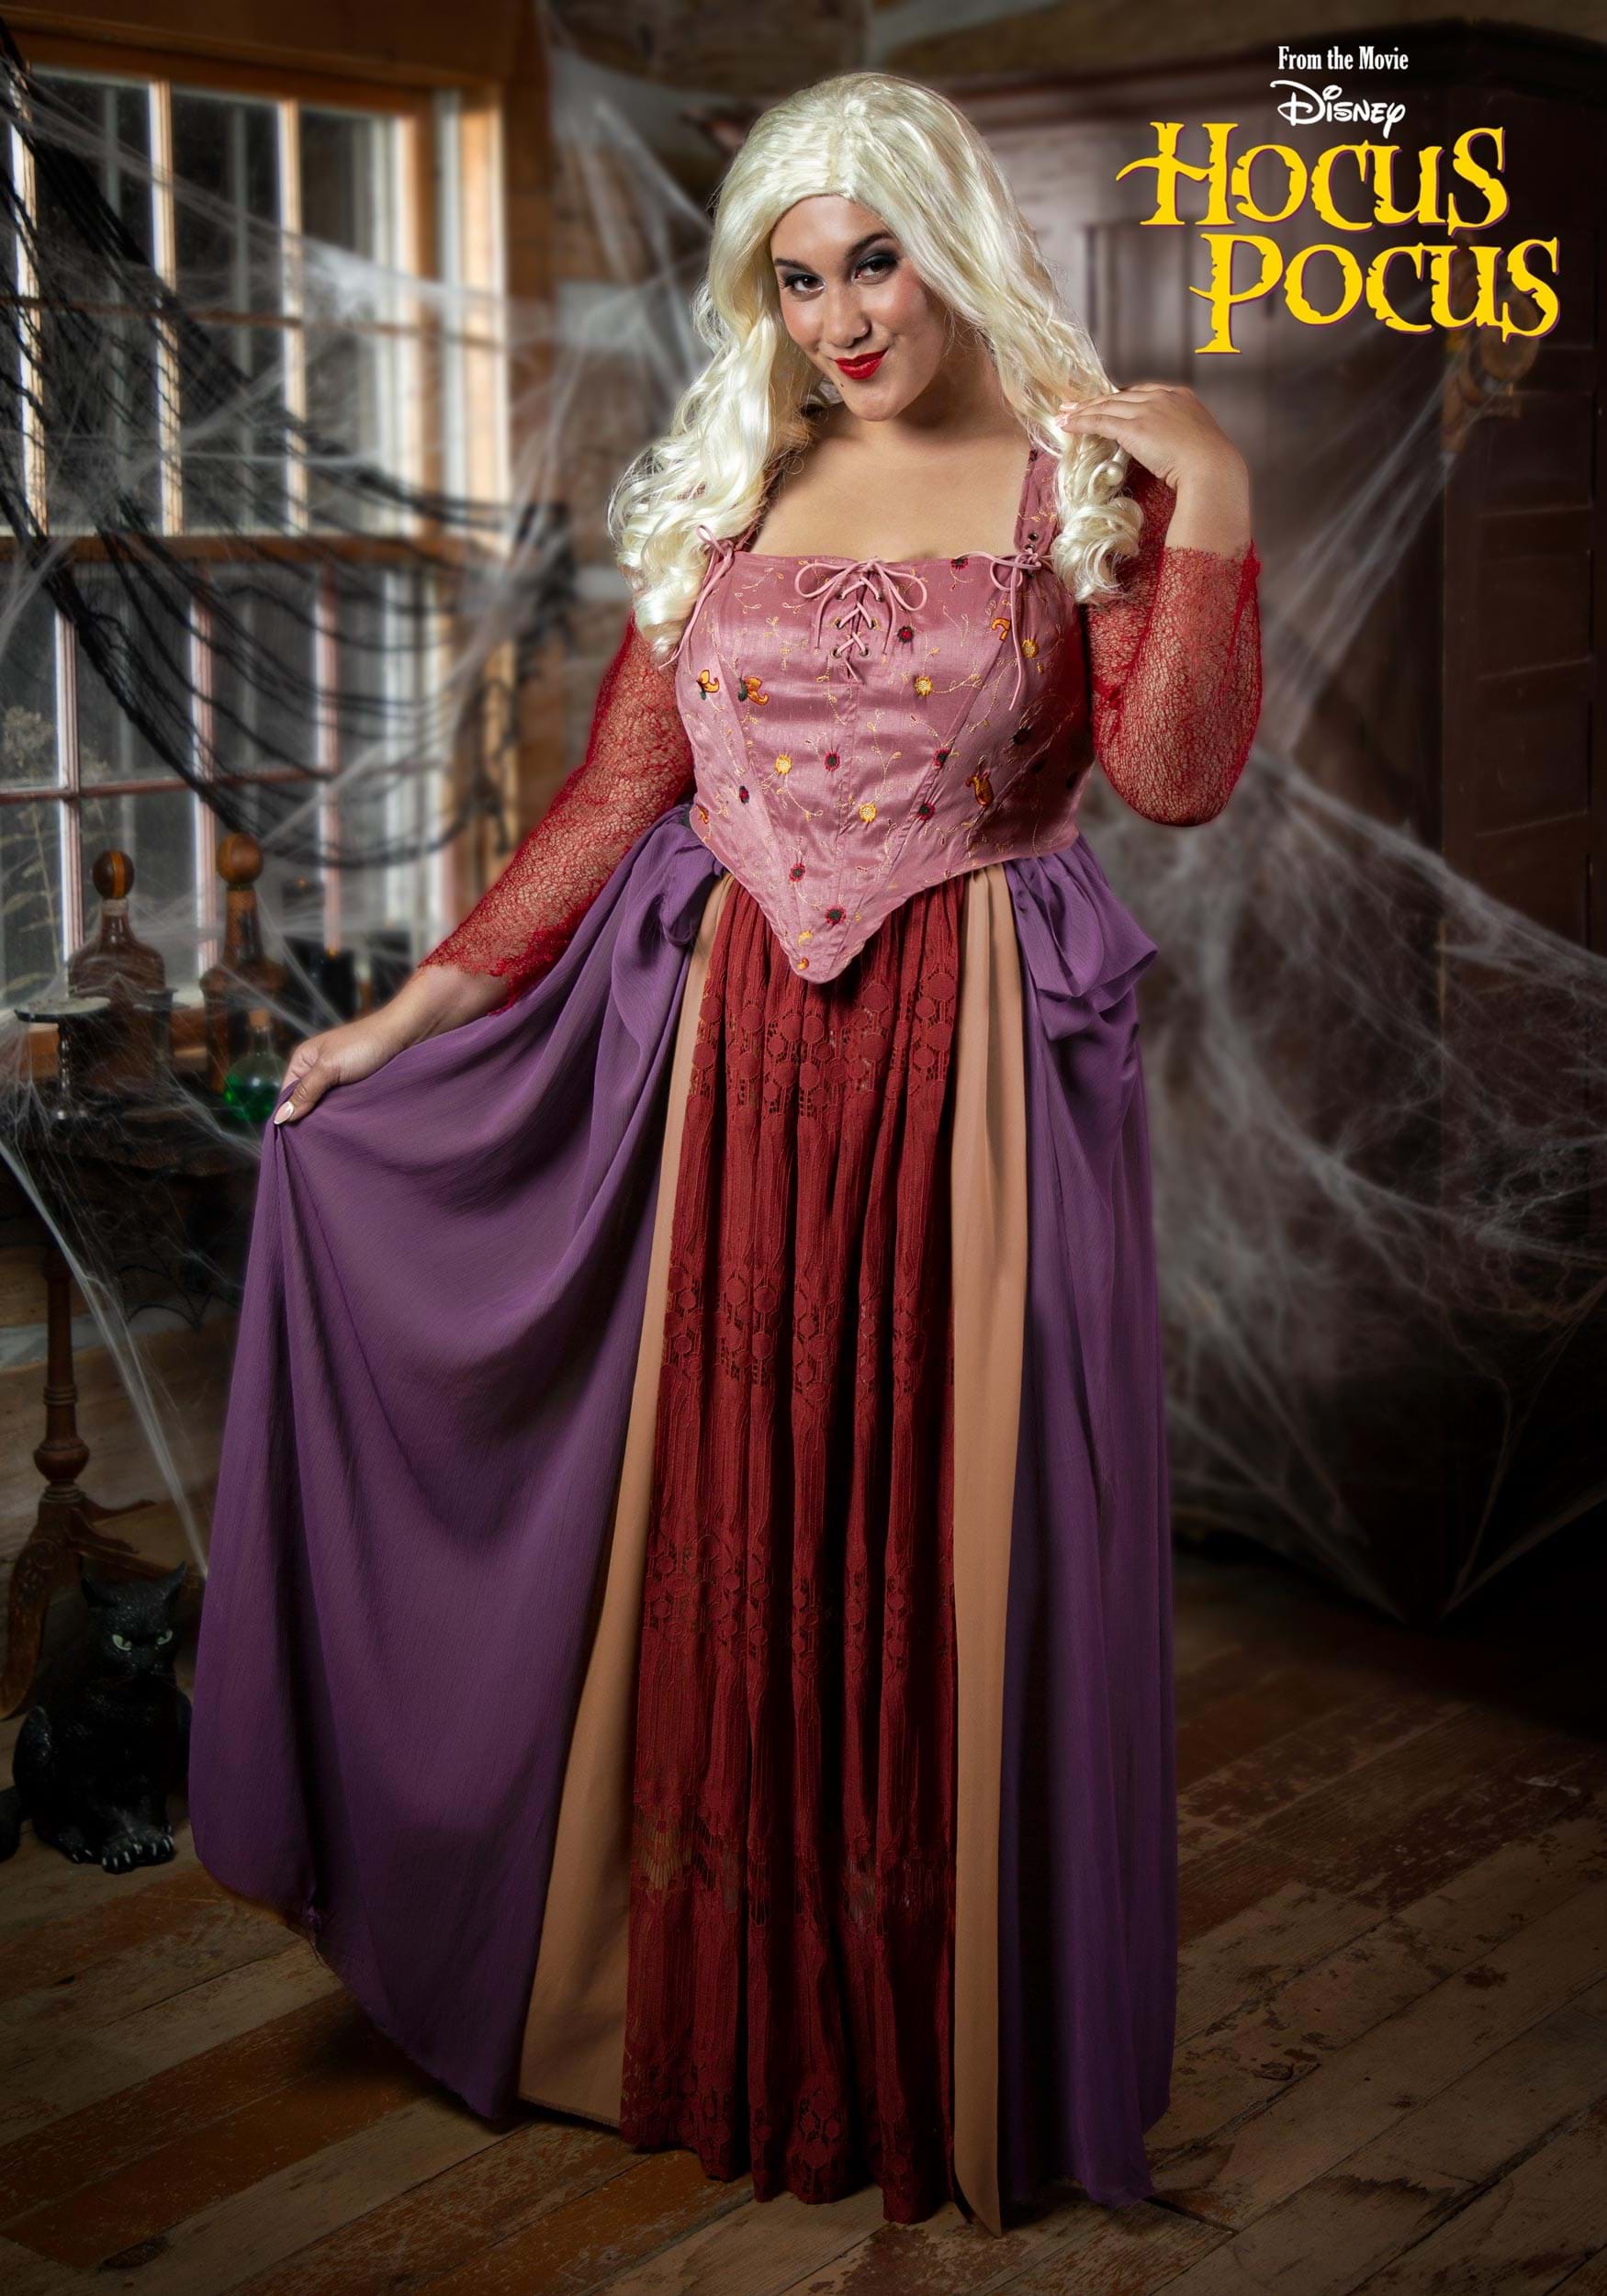 Hocus Pocus Sarah Sanderson Cosplay Costume Witch Robe Dress Halloween Outfit